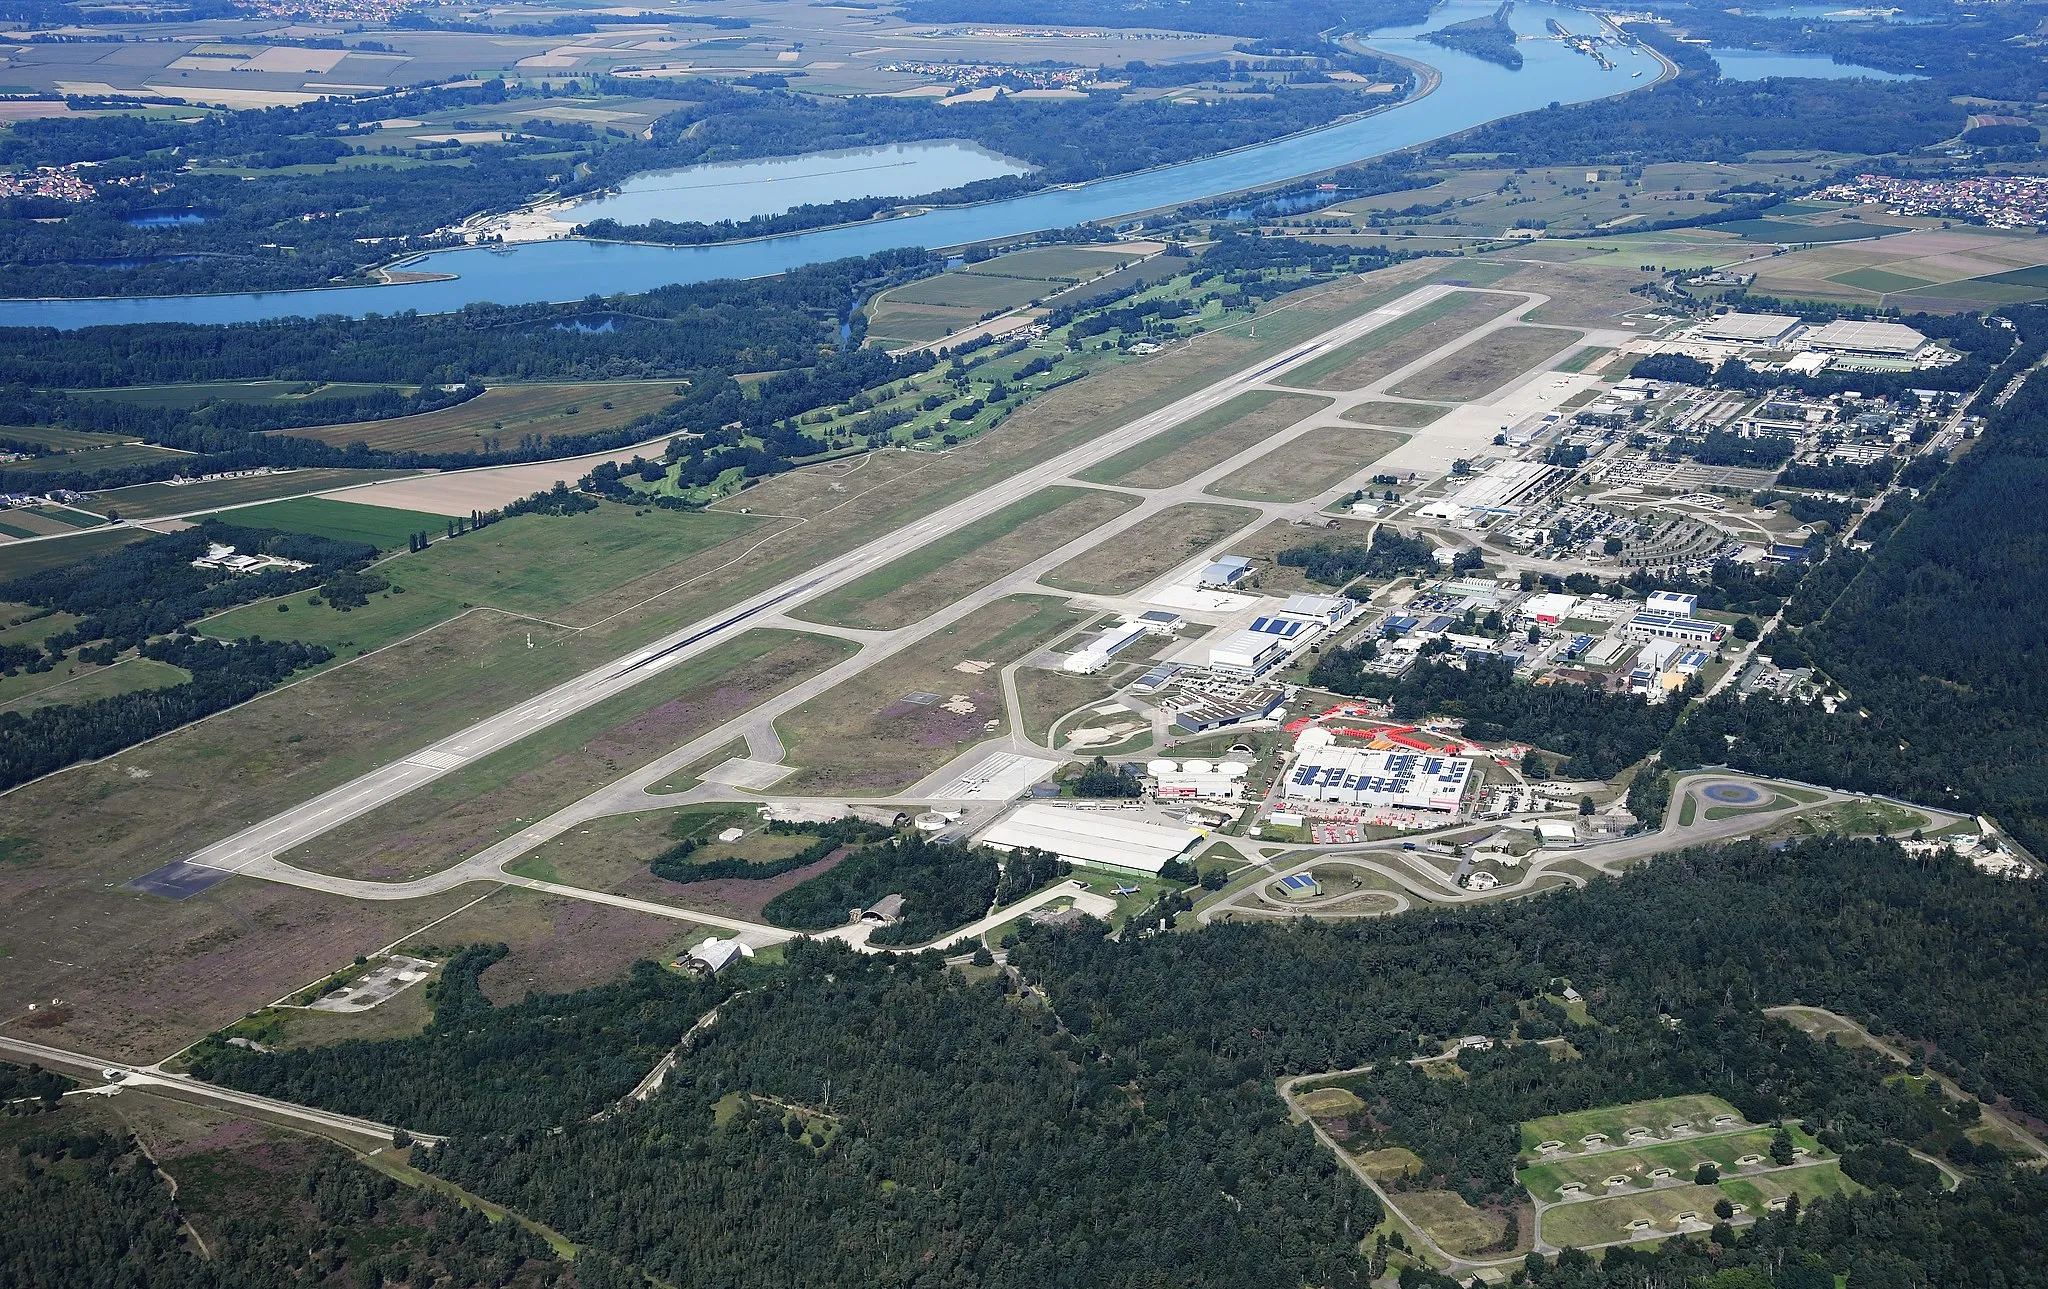 Photo showing: Aerial image of the Karlsruhe/Baden-Baden airport